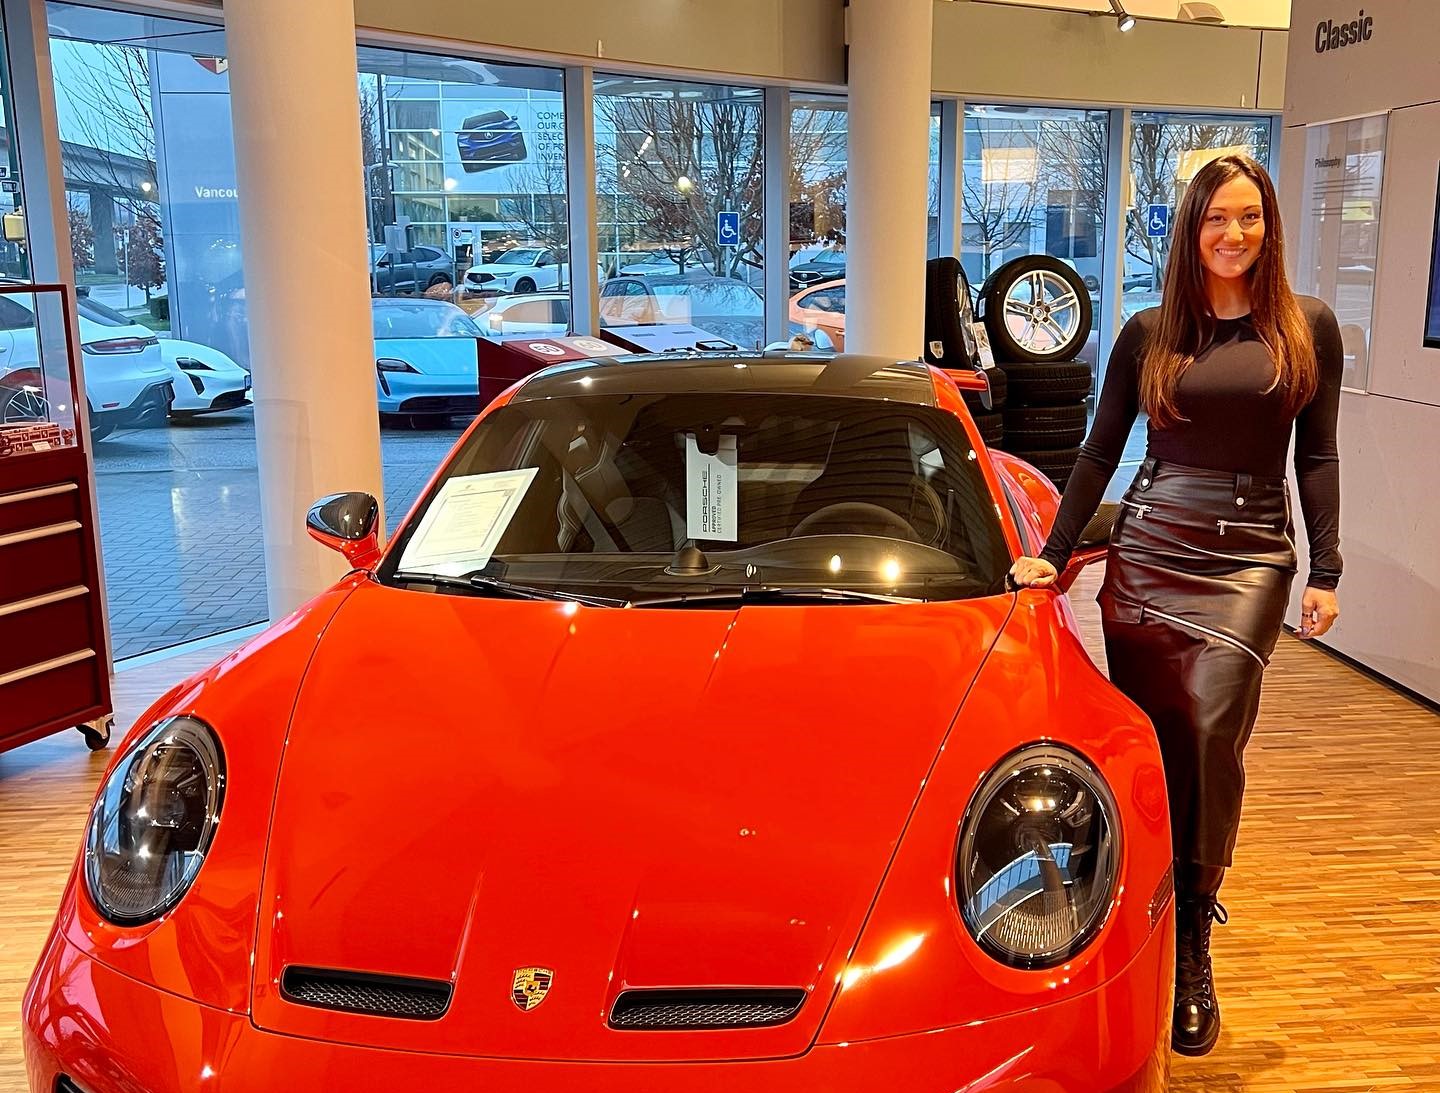 estate agent is offering a complimentary Porsche with condo purchases in Montréal or Vancouver, leaving property buyers stunned.